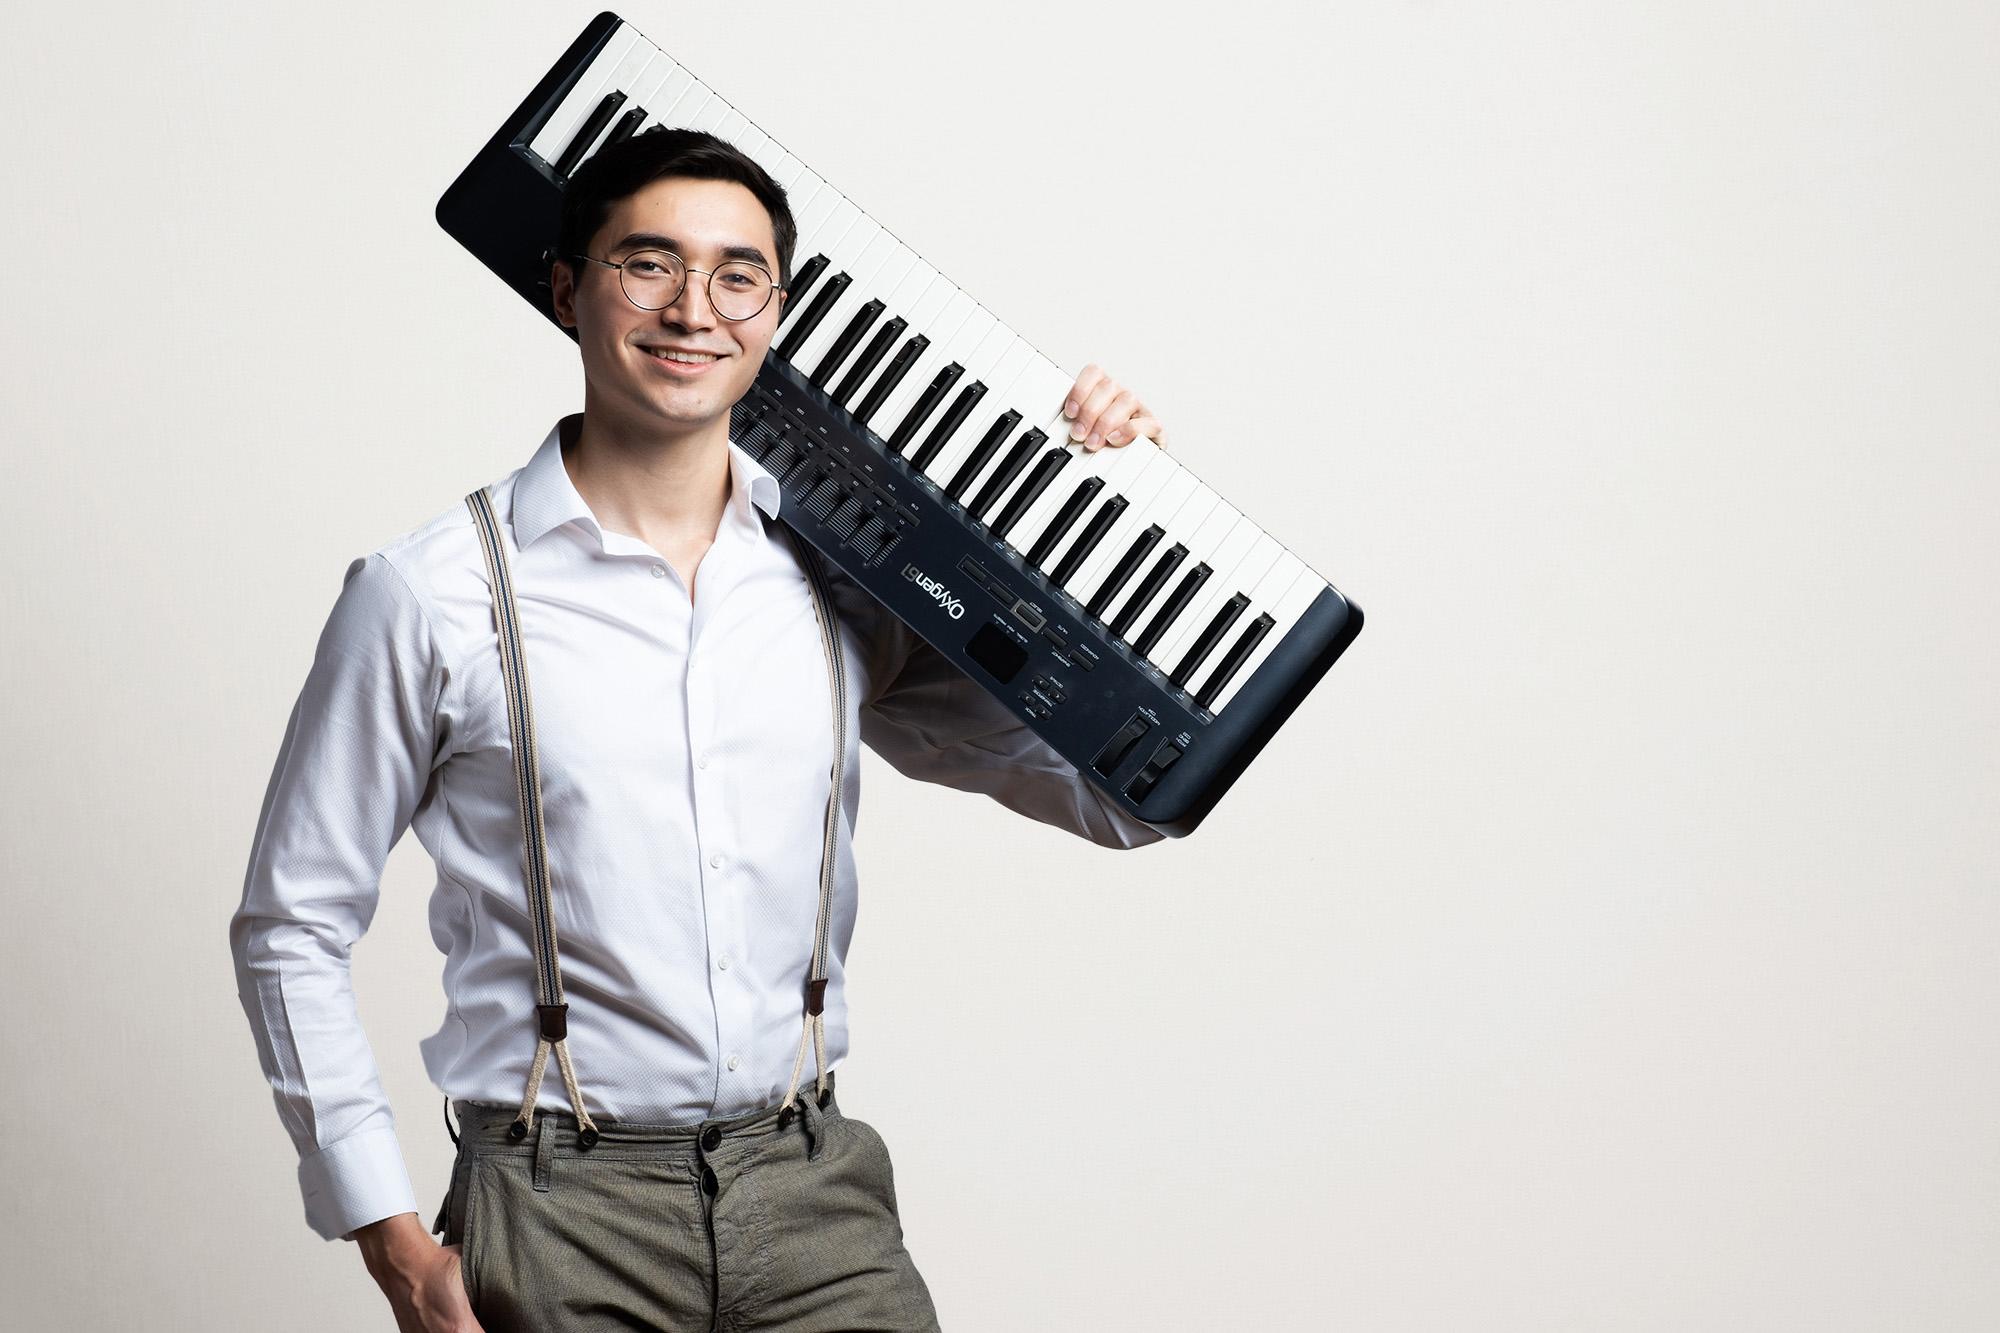 Student Composer looks into camera with electronic keyboard on his shoulder